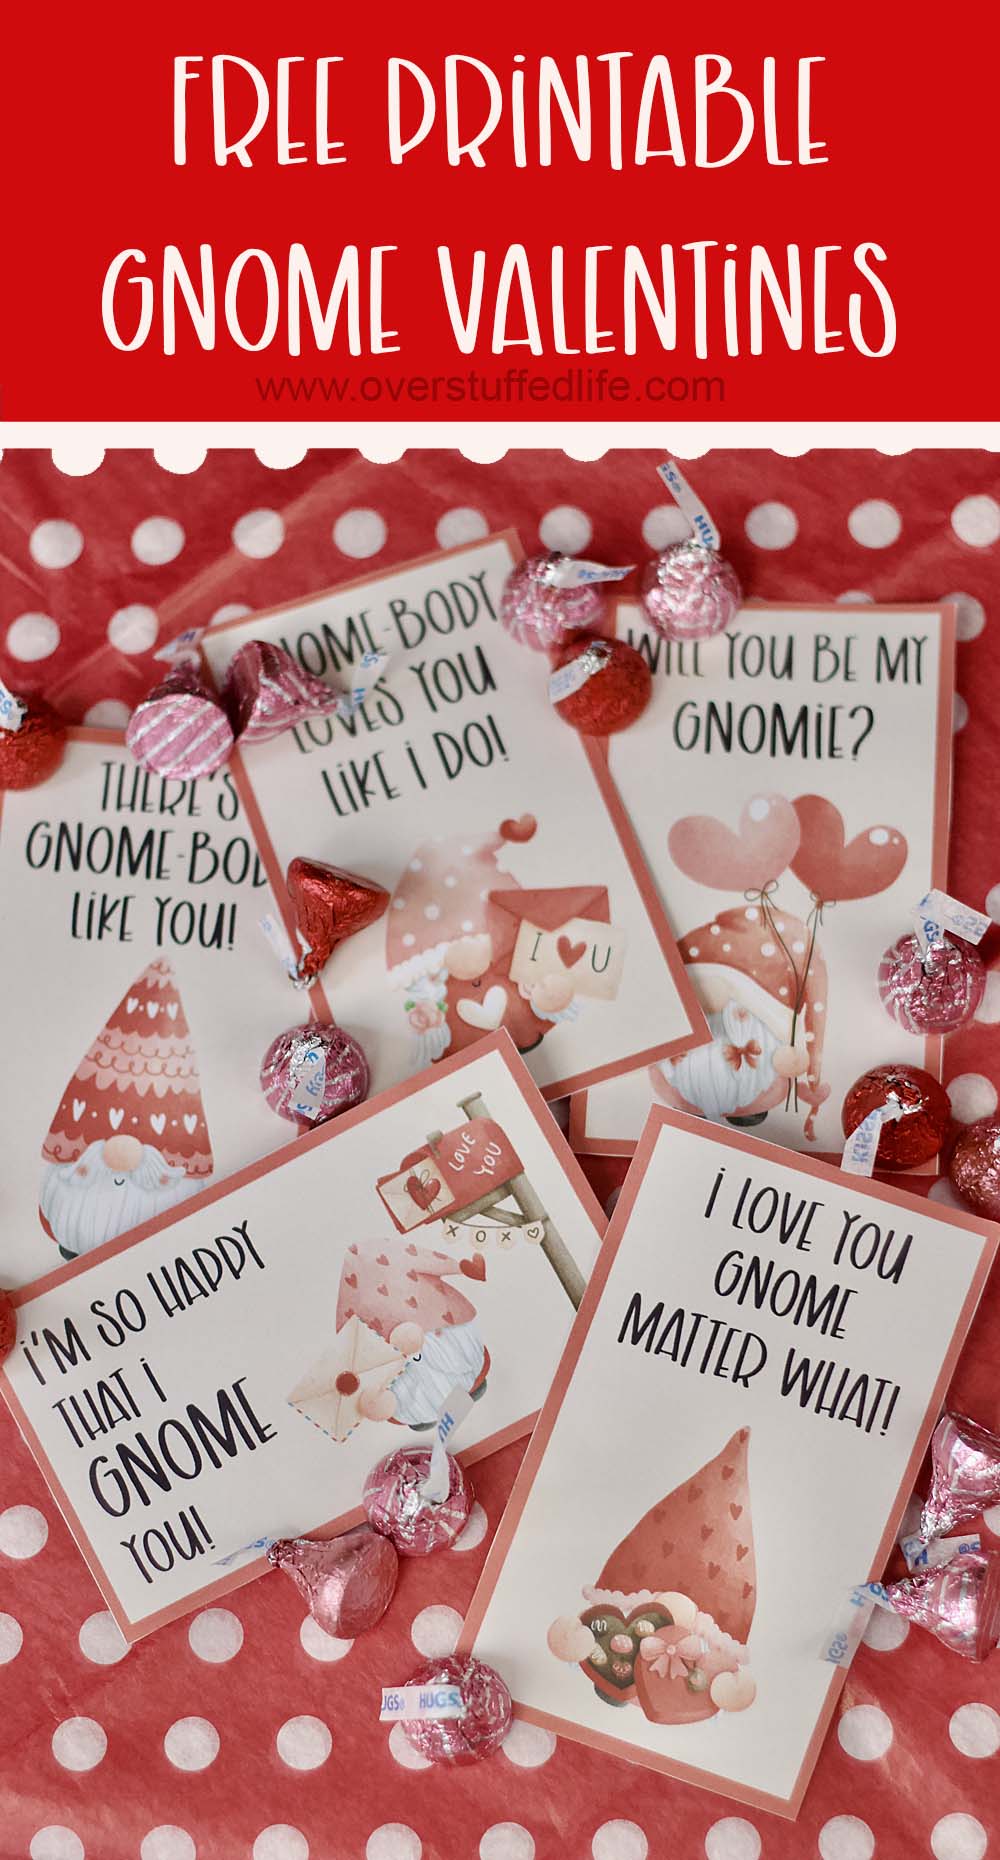 printable valentine cards featuring gnomes on a red polka dot background amongst Hershey's kisses. via @lara_neves